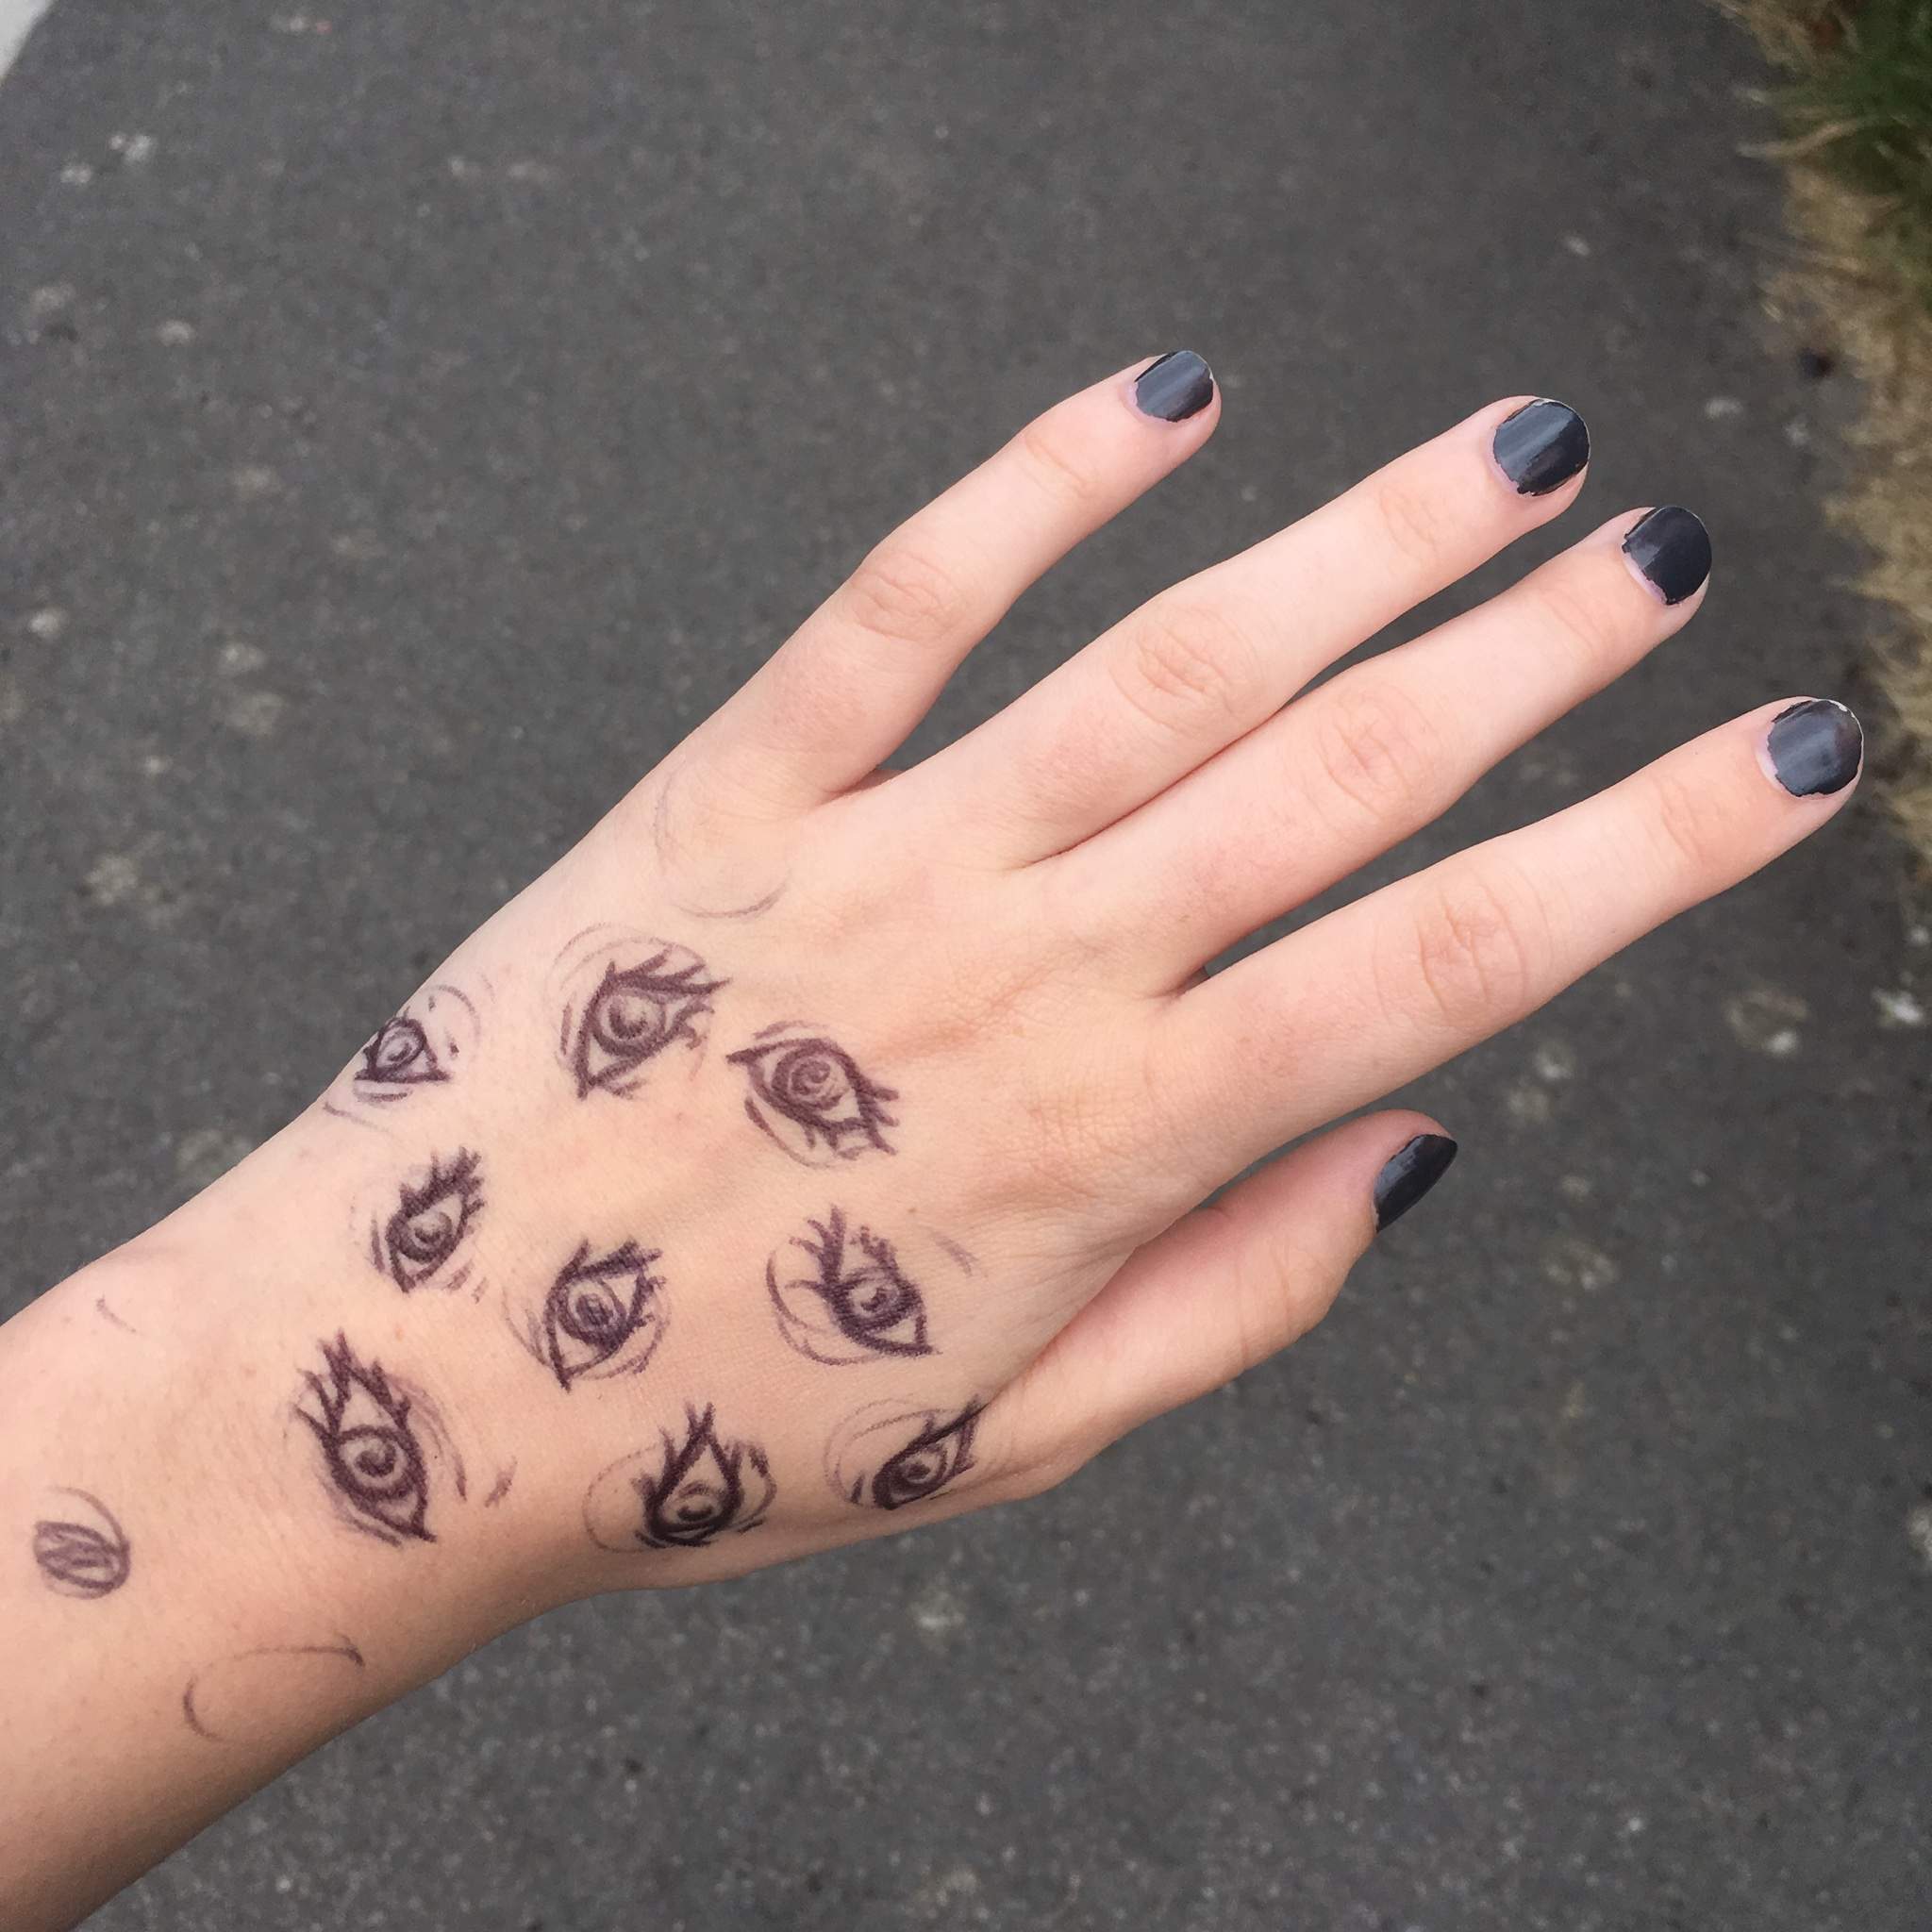 what i draw on my hands Ghoul Amino